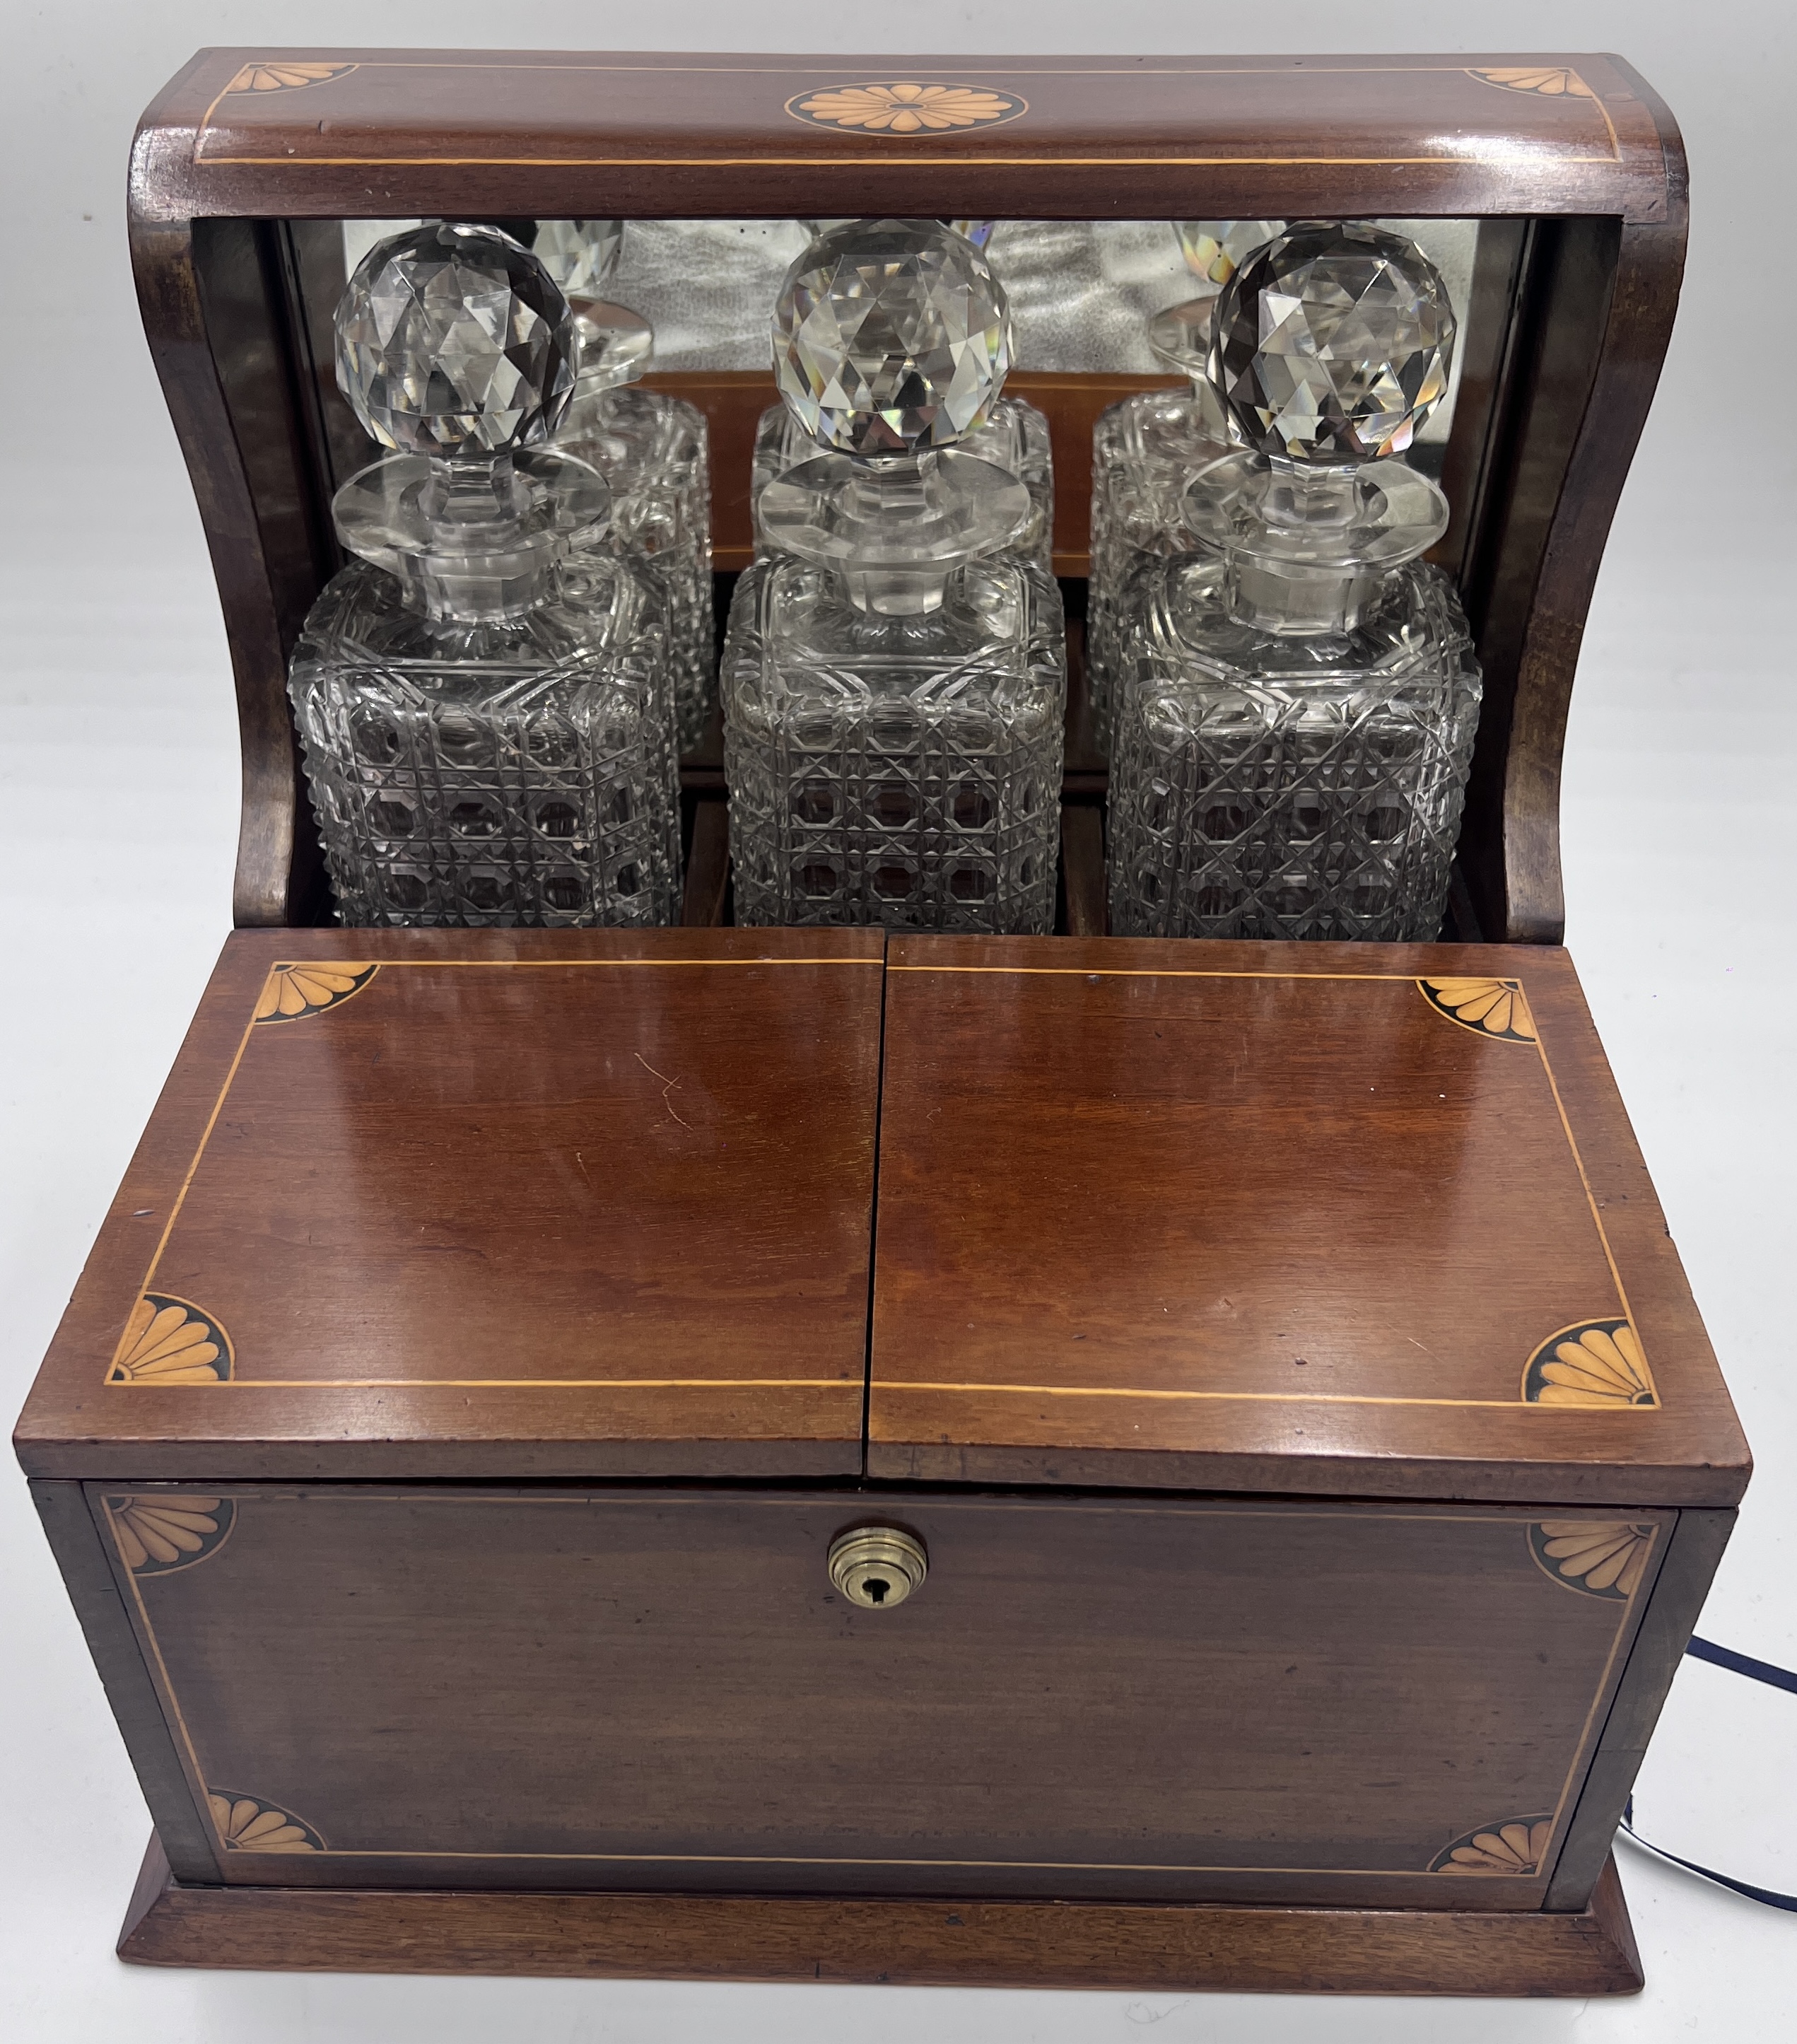 An Edwardian mahogany inlaid cut glass tantalus and games box containing cigar cutter, silver plated